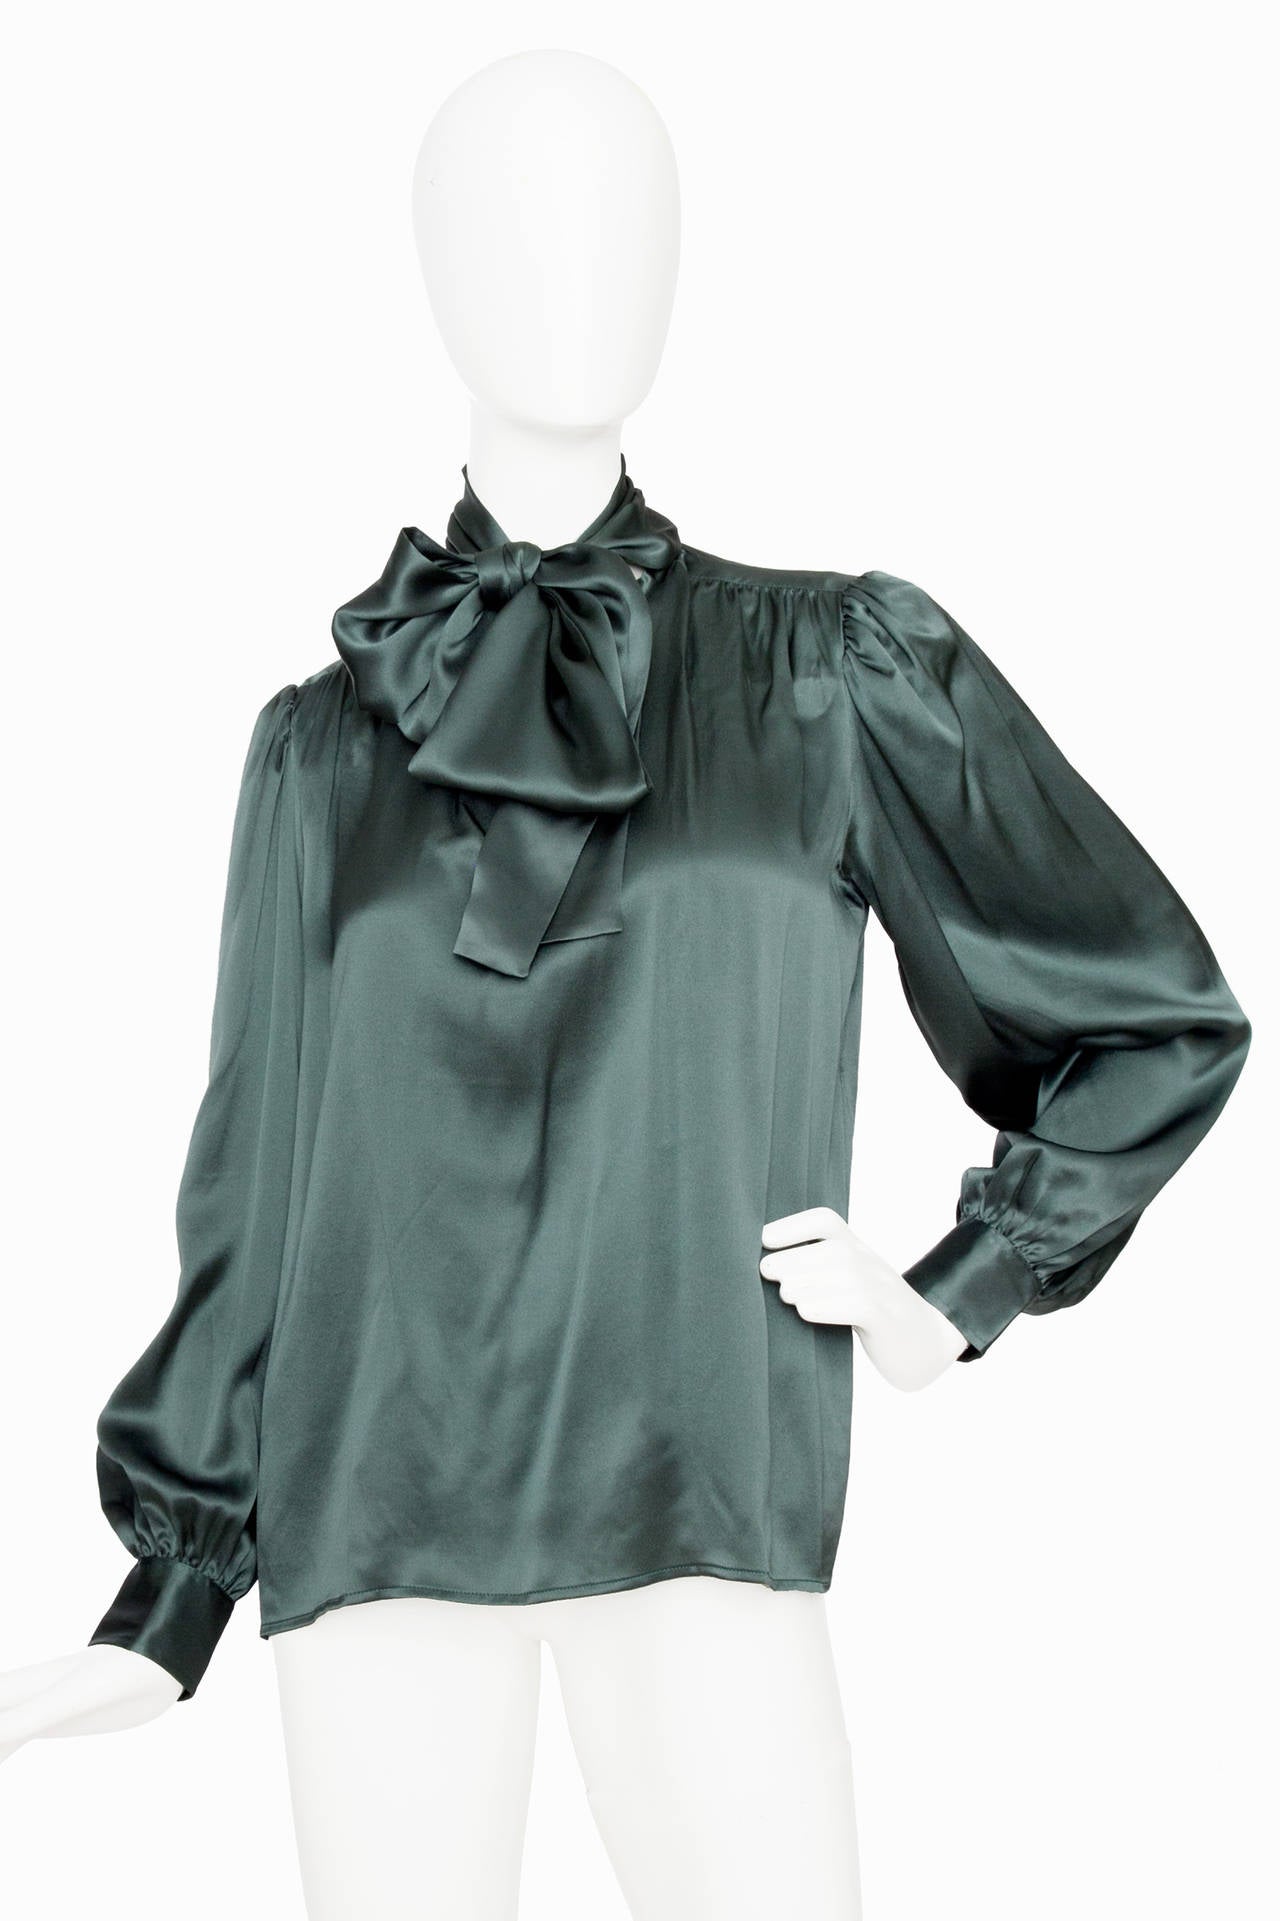 A 1980s Yves Saint Laurent dusty green silk blouse with blouson sleeves and slightly puffed shoulders. In the front the blouse has a single one button closure and an attached bow to tie around the neck. The blouse has one buttoned cuffs. 

The